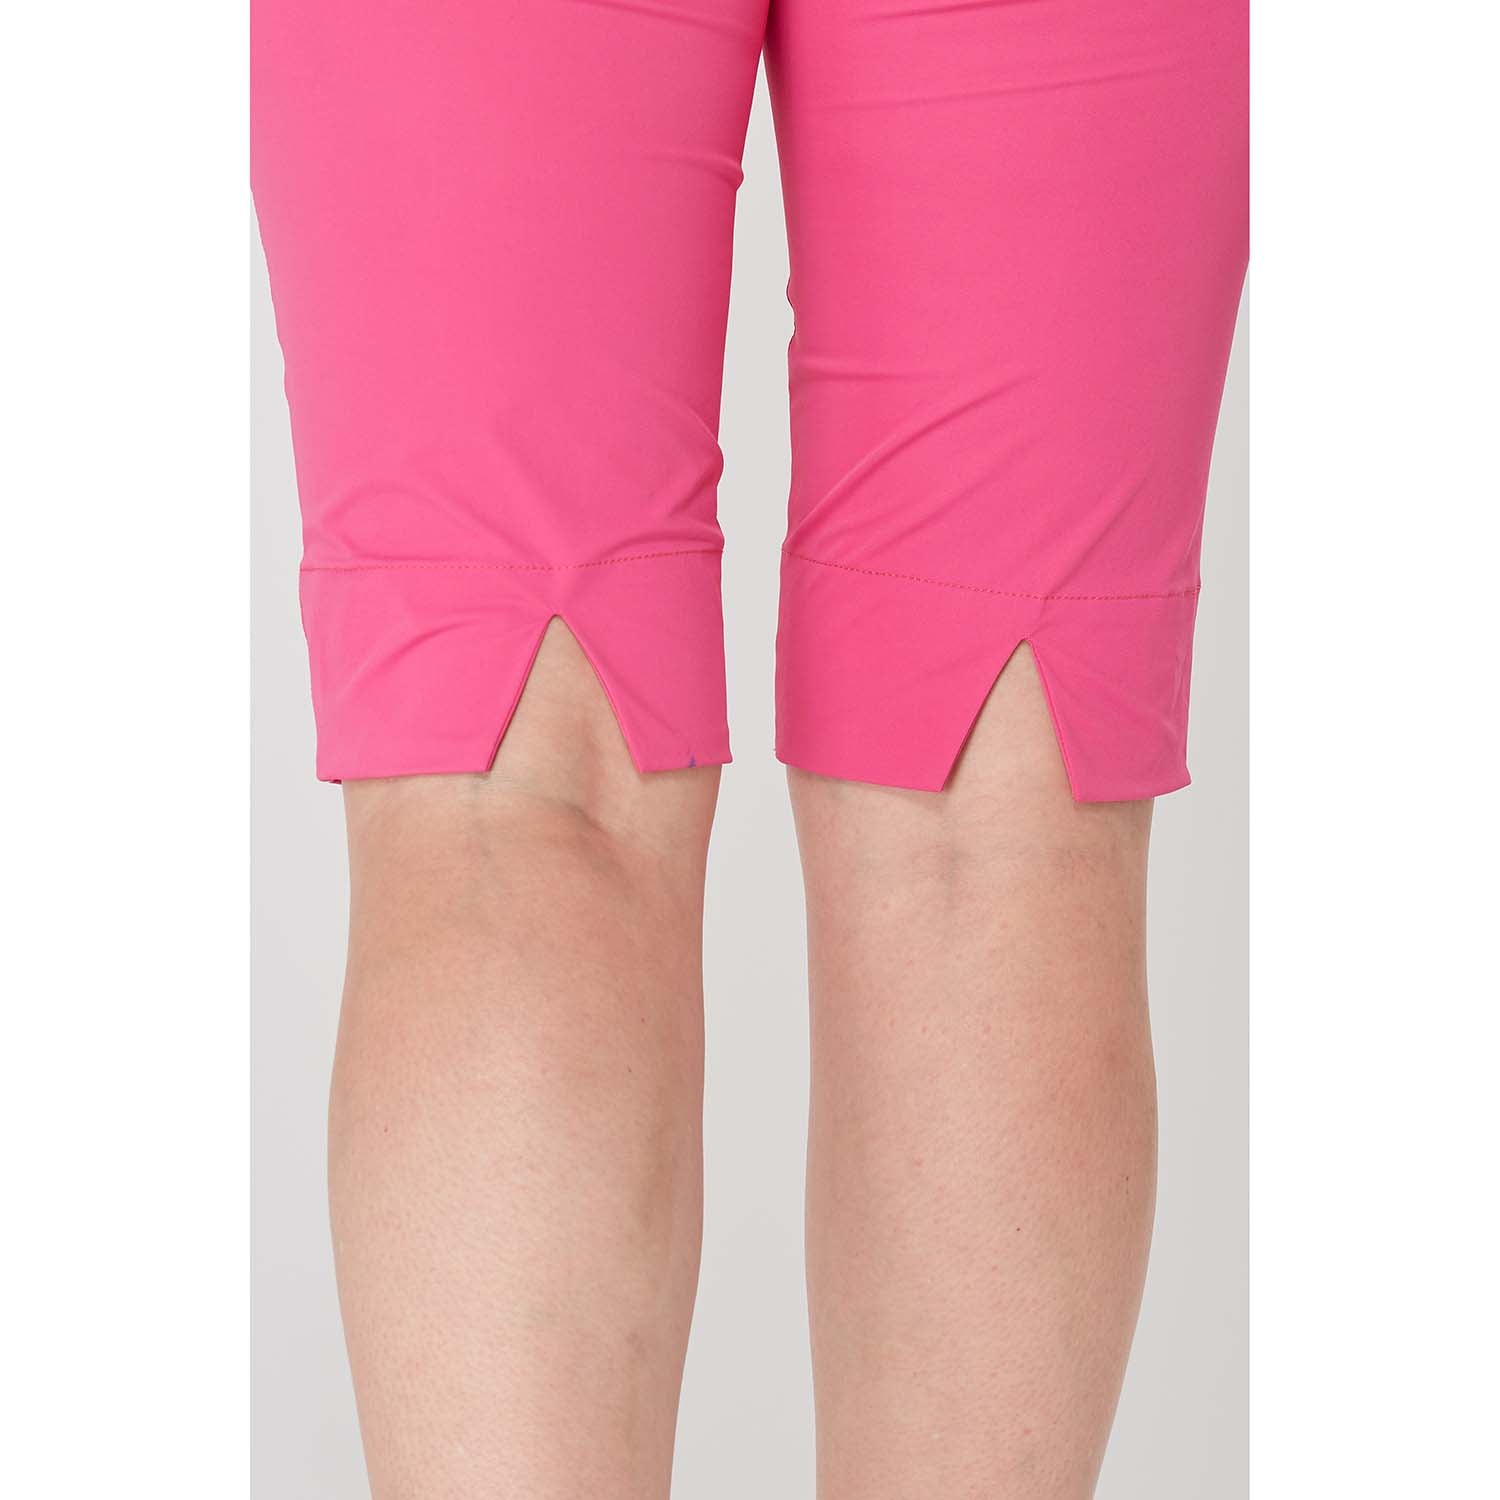 Swing Out Sister Ladies Lush Pink Dri-fit City Shorts